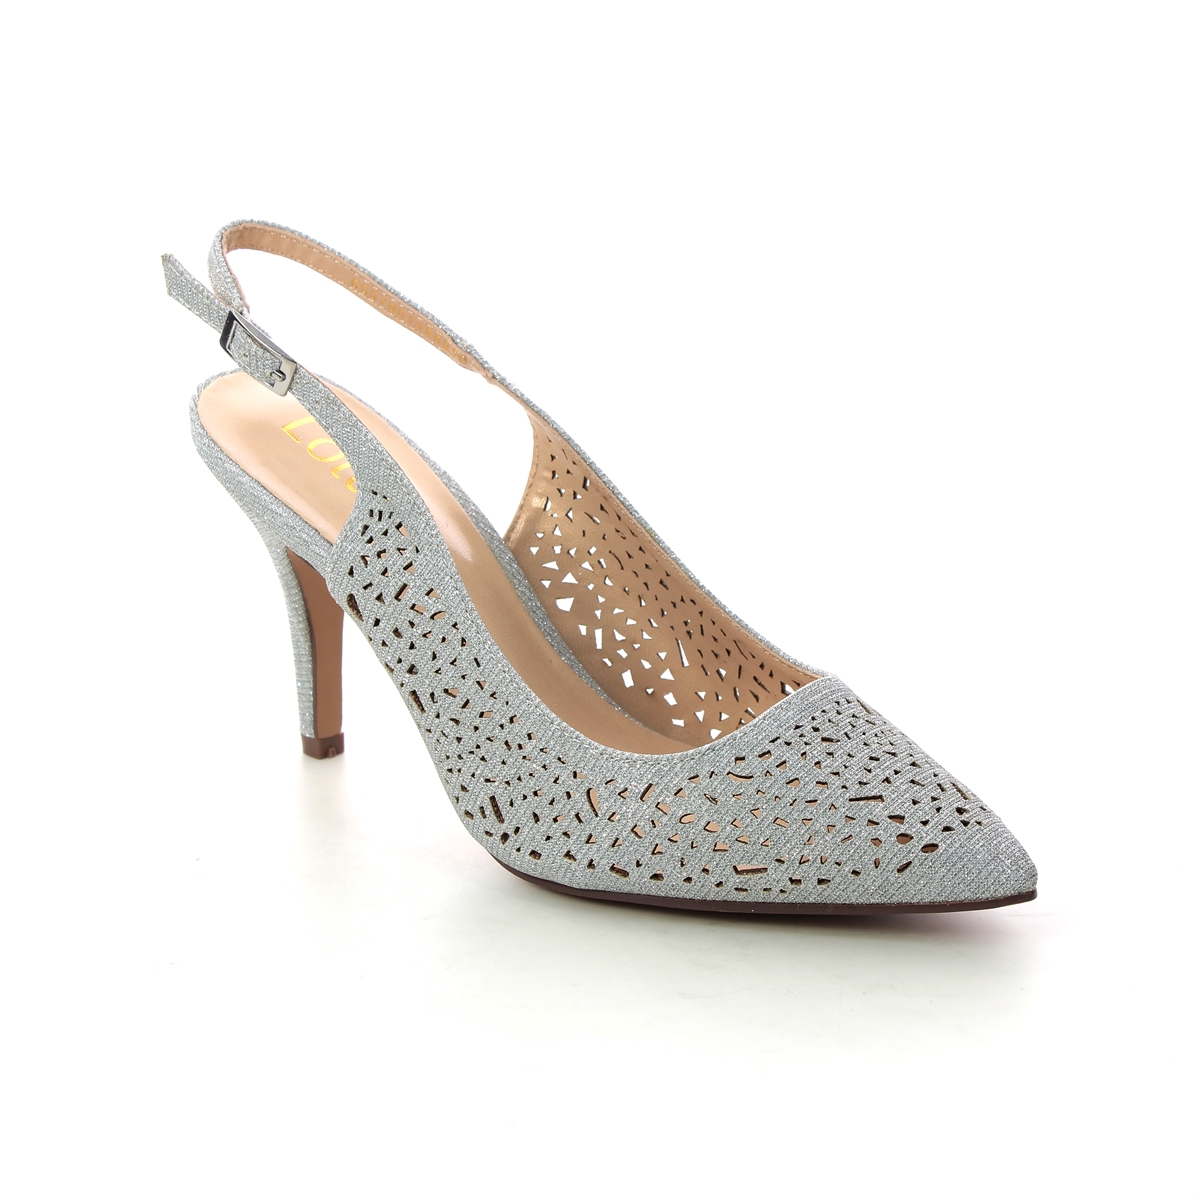 Lotus Lyla Silver Womens High Heels in a Plain Textile in Size 4